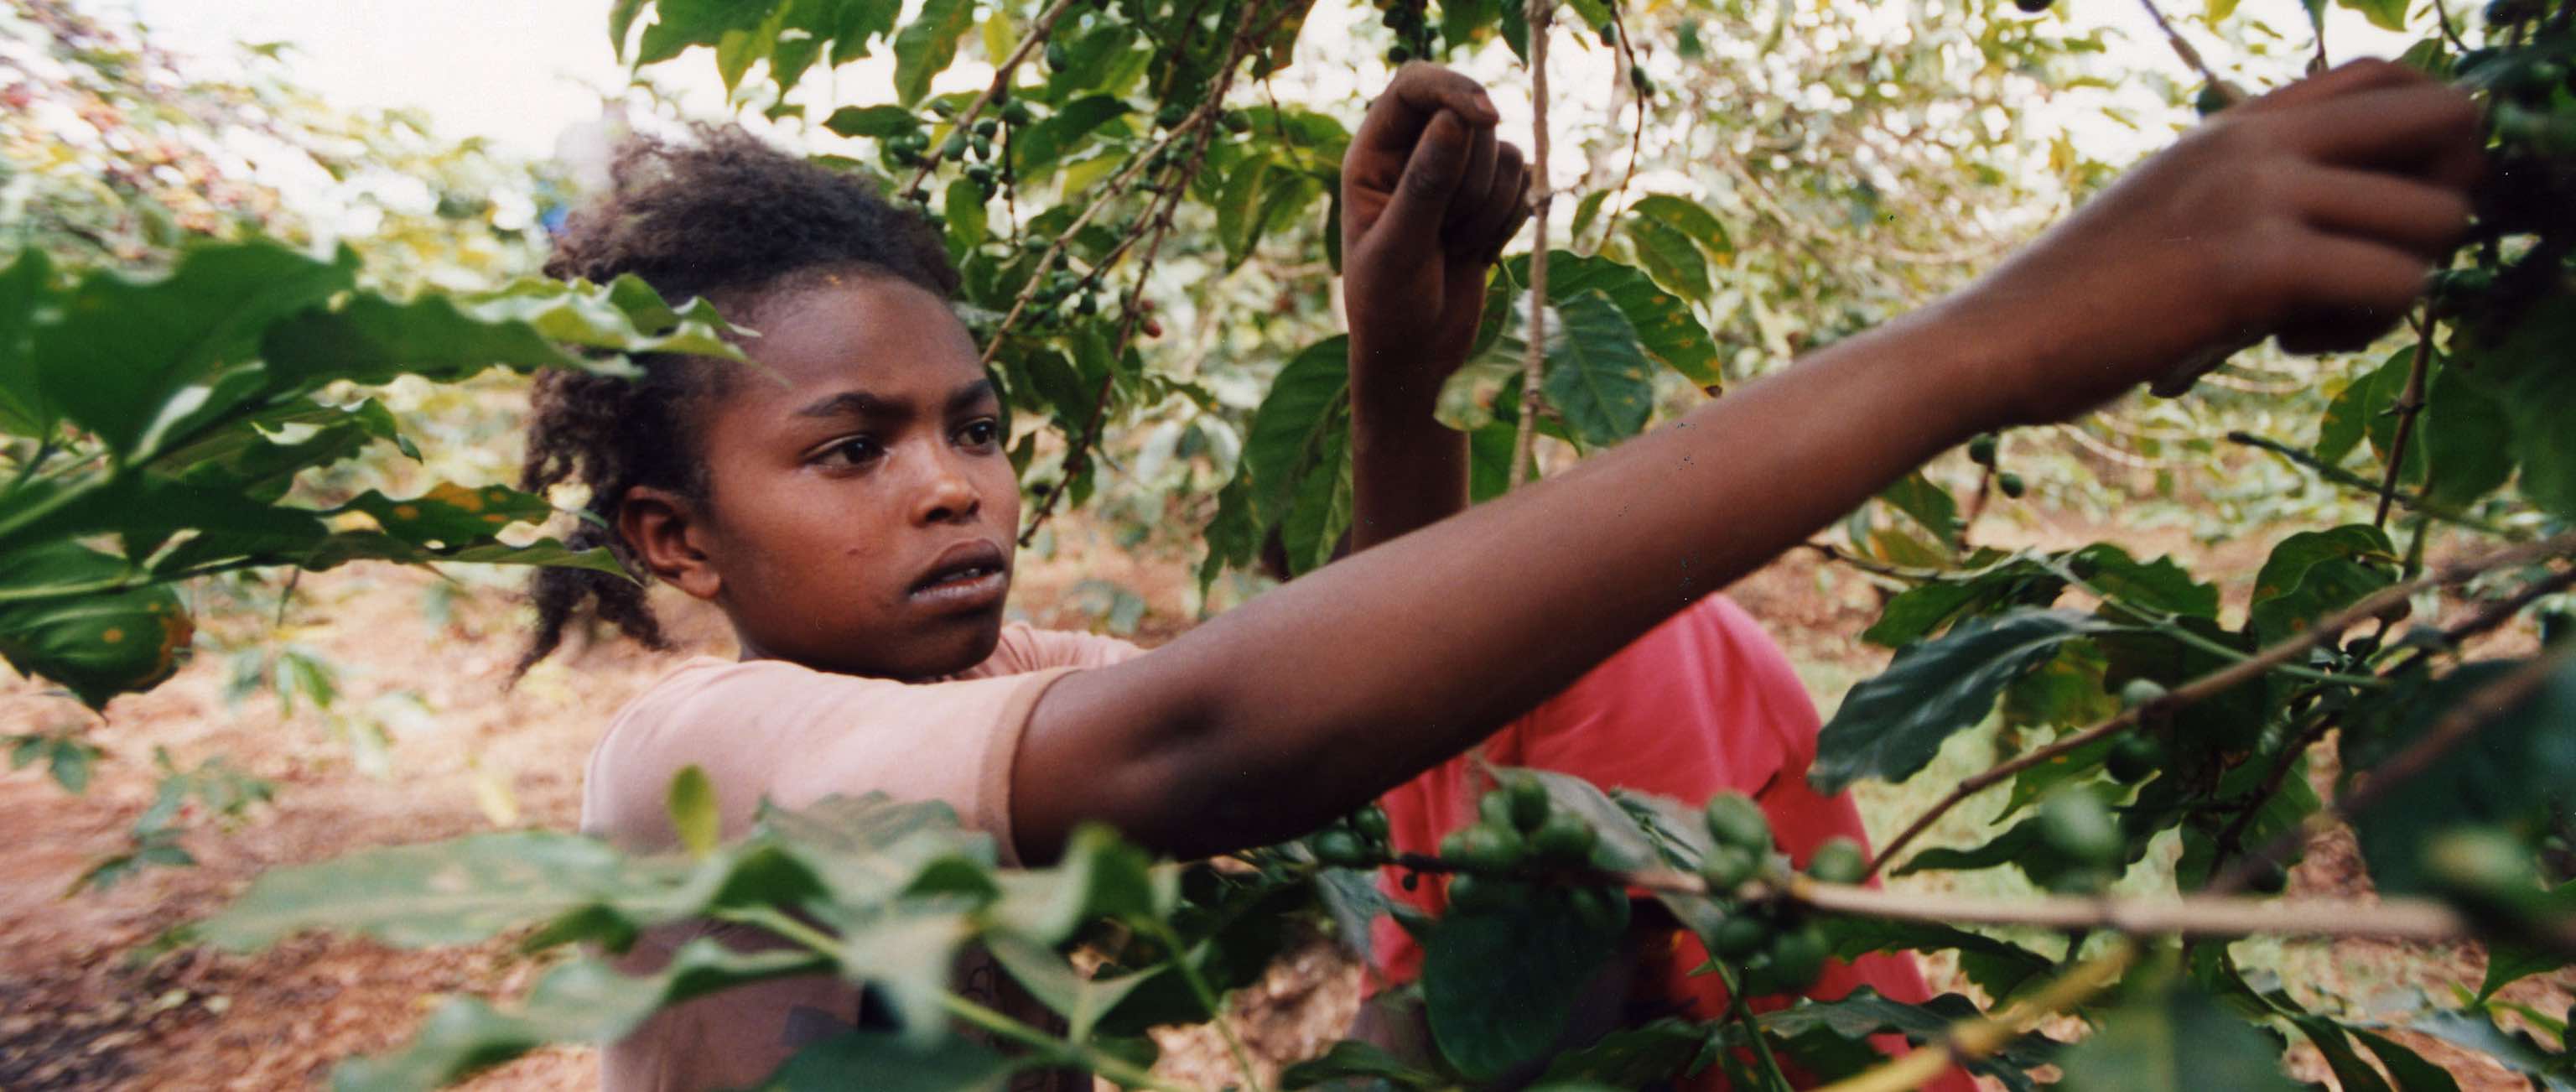 Ending Child Labor: The Dirty Business of Cleaning Up Supply Chains